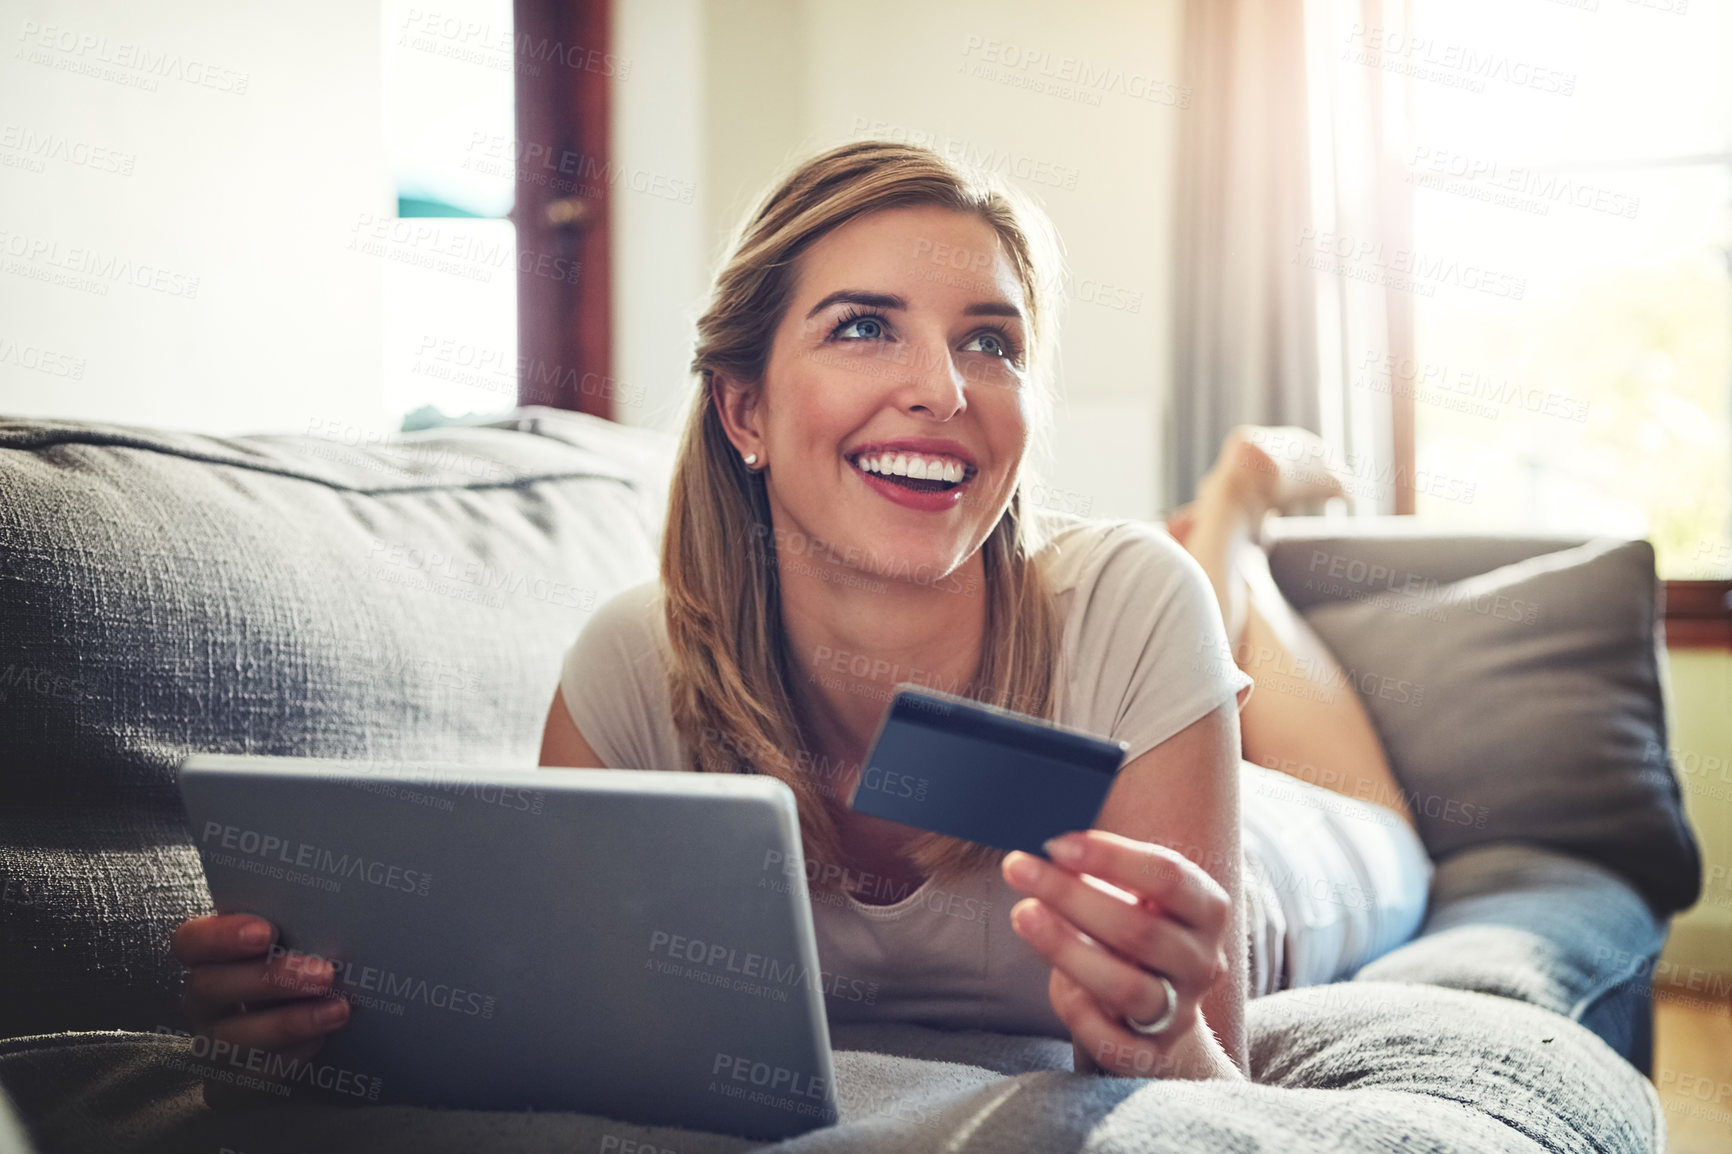 Buy stock photo Shot of a young woman doing some online shopping on her digital tablet